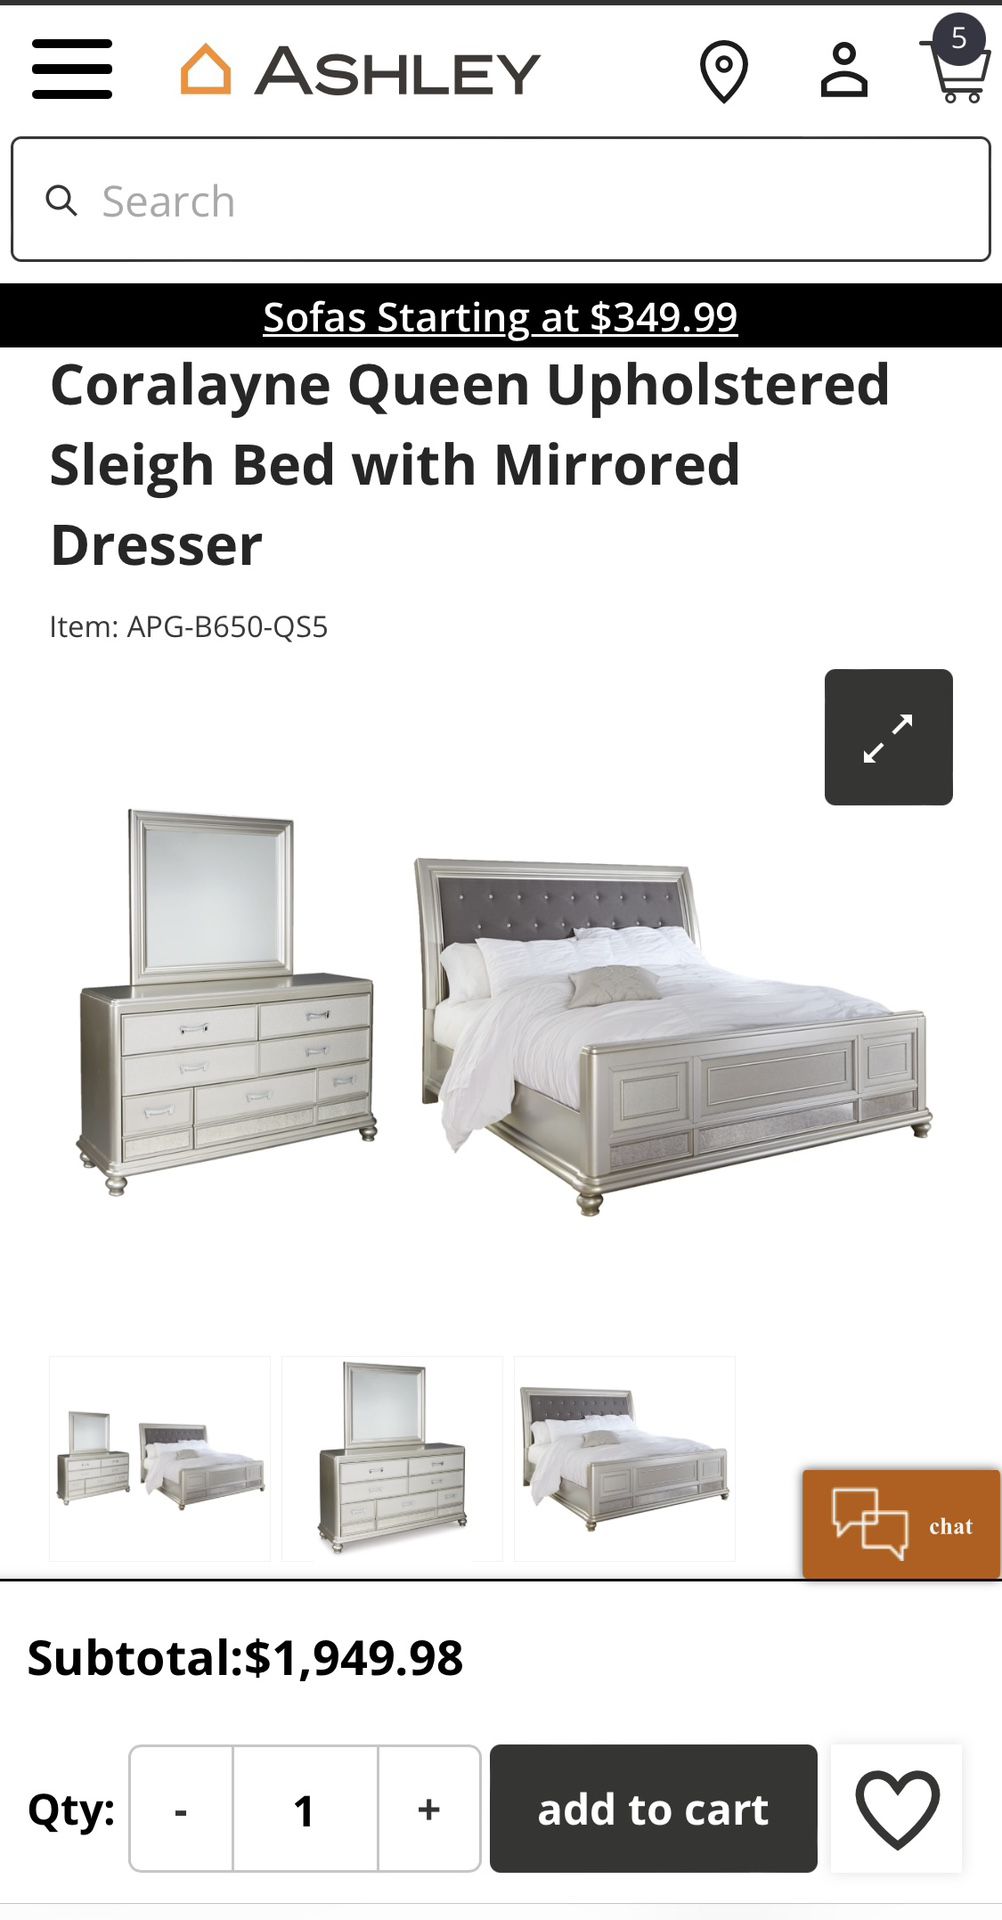 Ashley’s Furniture Bedroom Set (Coralayne Queen Upholstered Sleigh Bed with Mirrored Dresser)